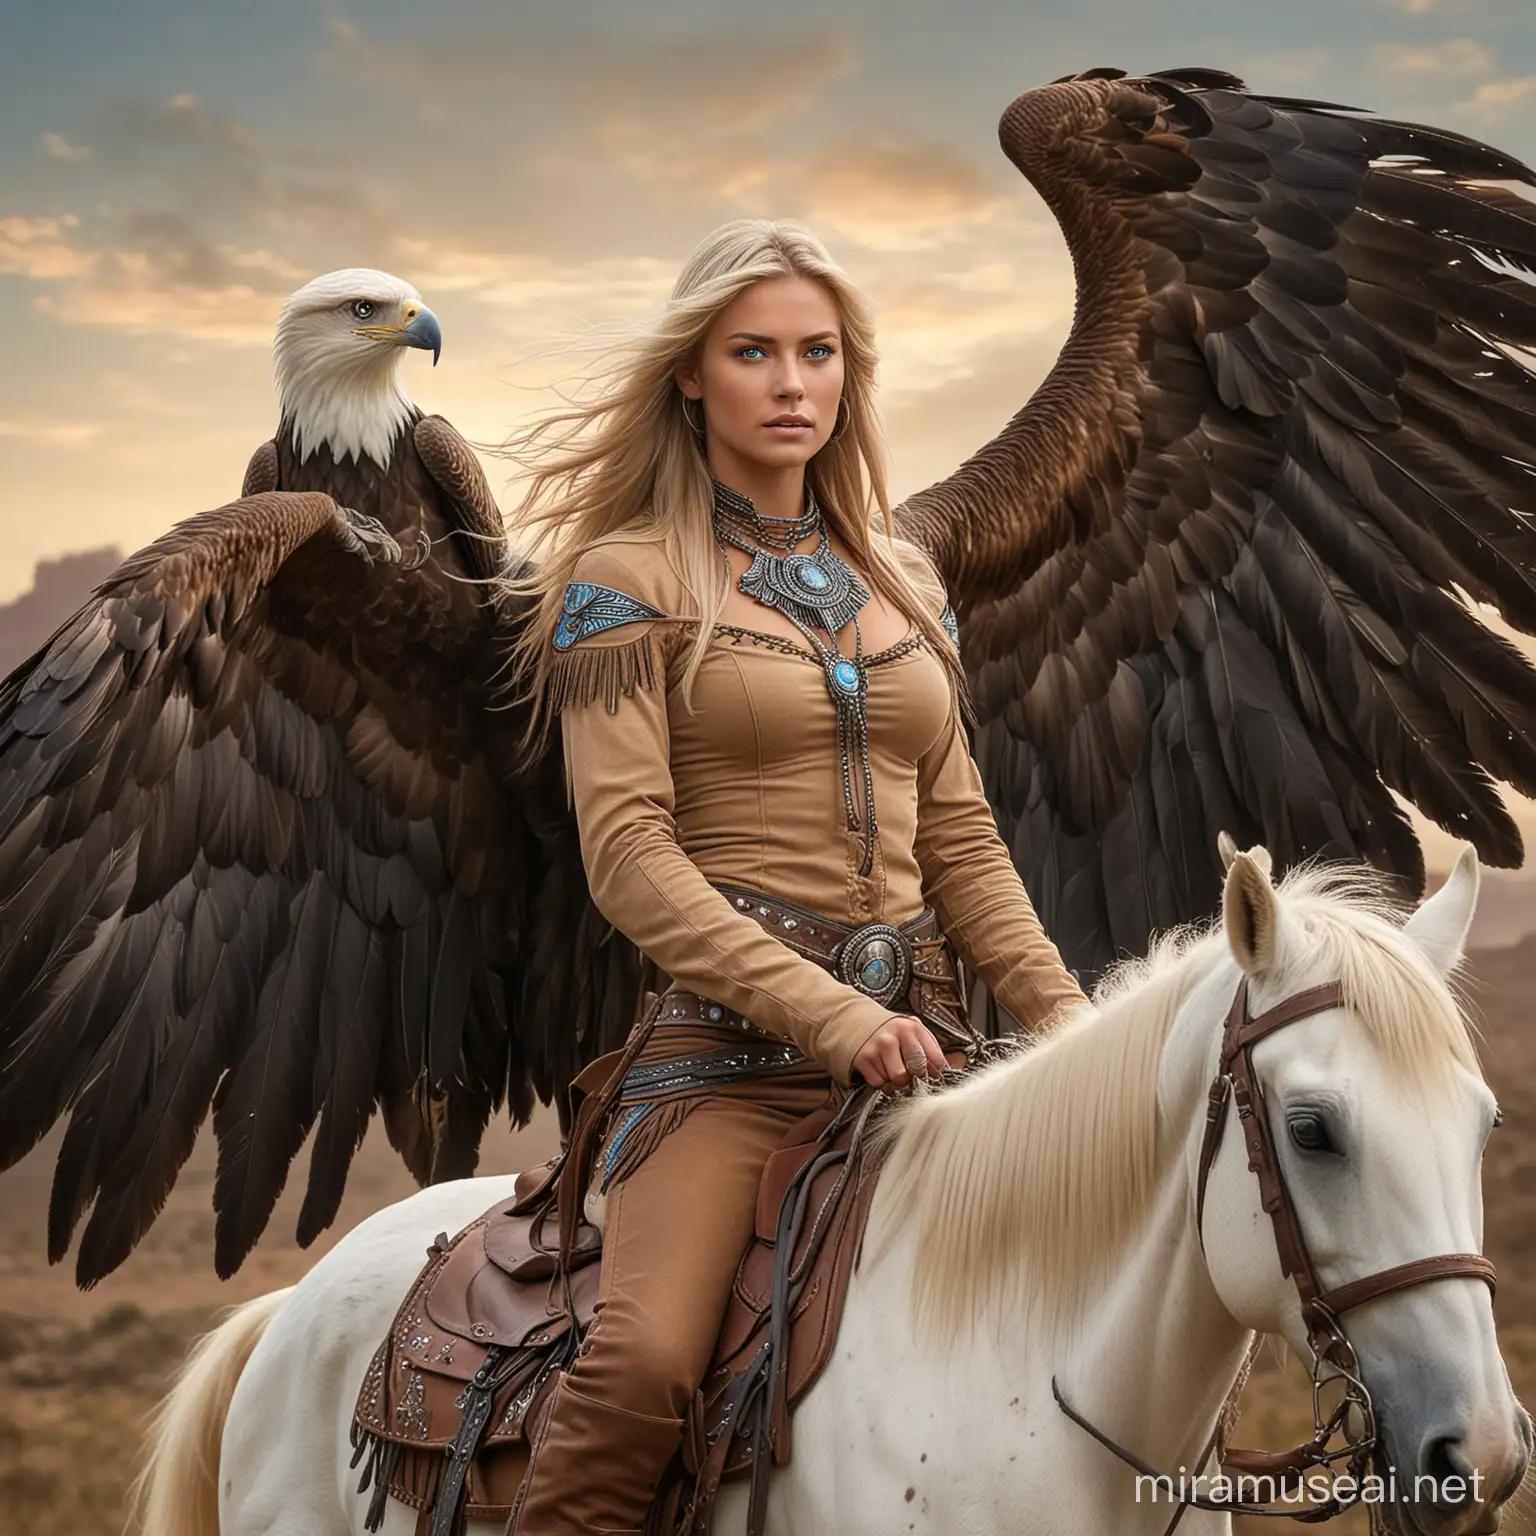 Blond Cowgirl Riding Horse with EagleWinged Apache Warrior